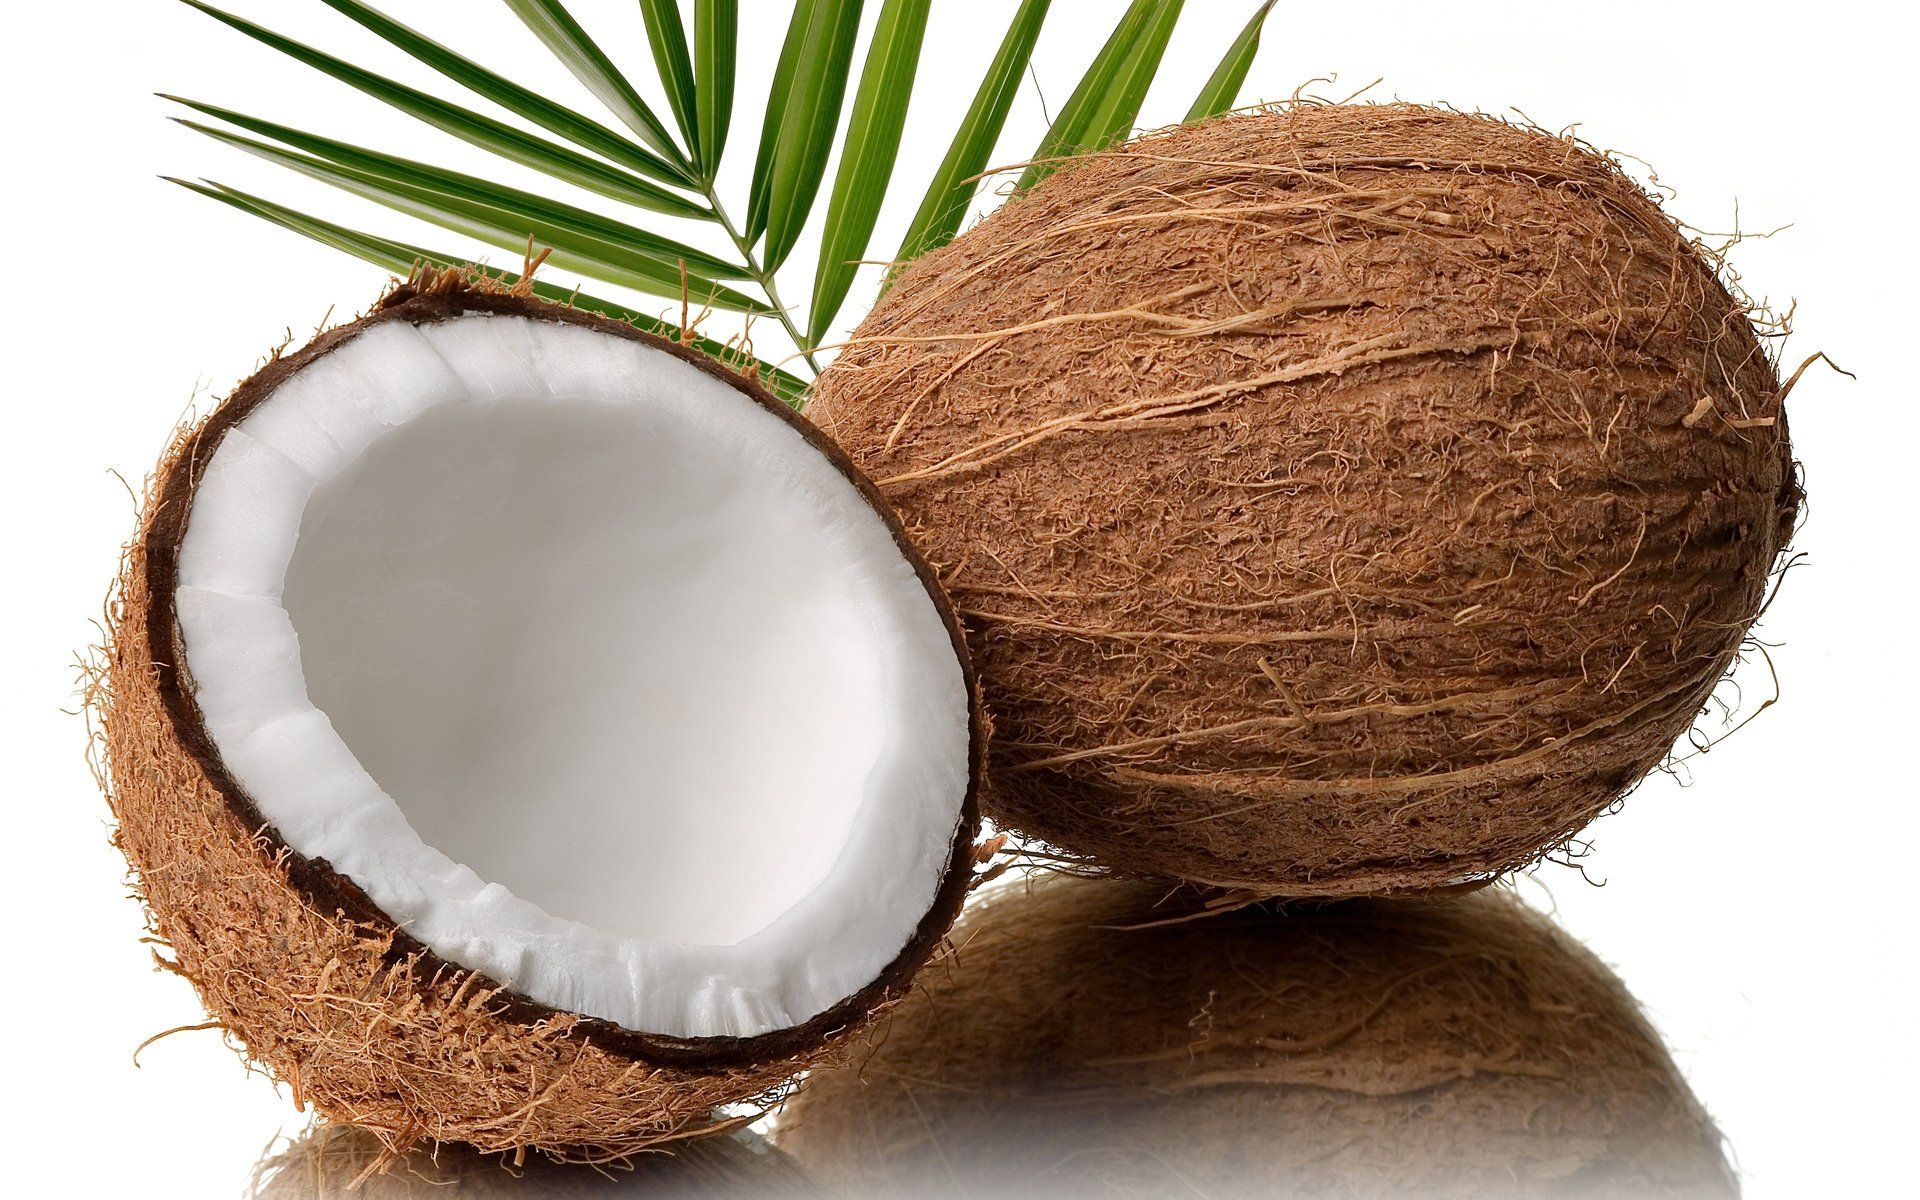 A coconut cut in half with a palm leaf on top - Coconut